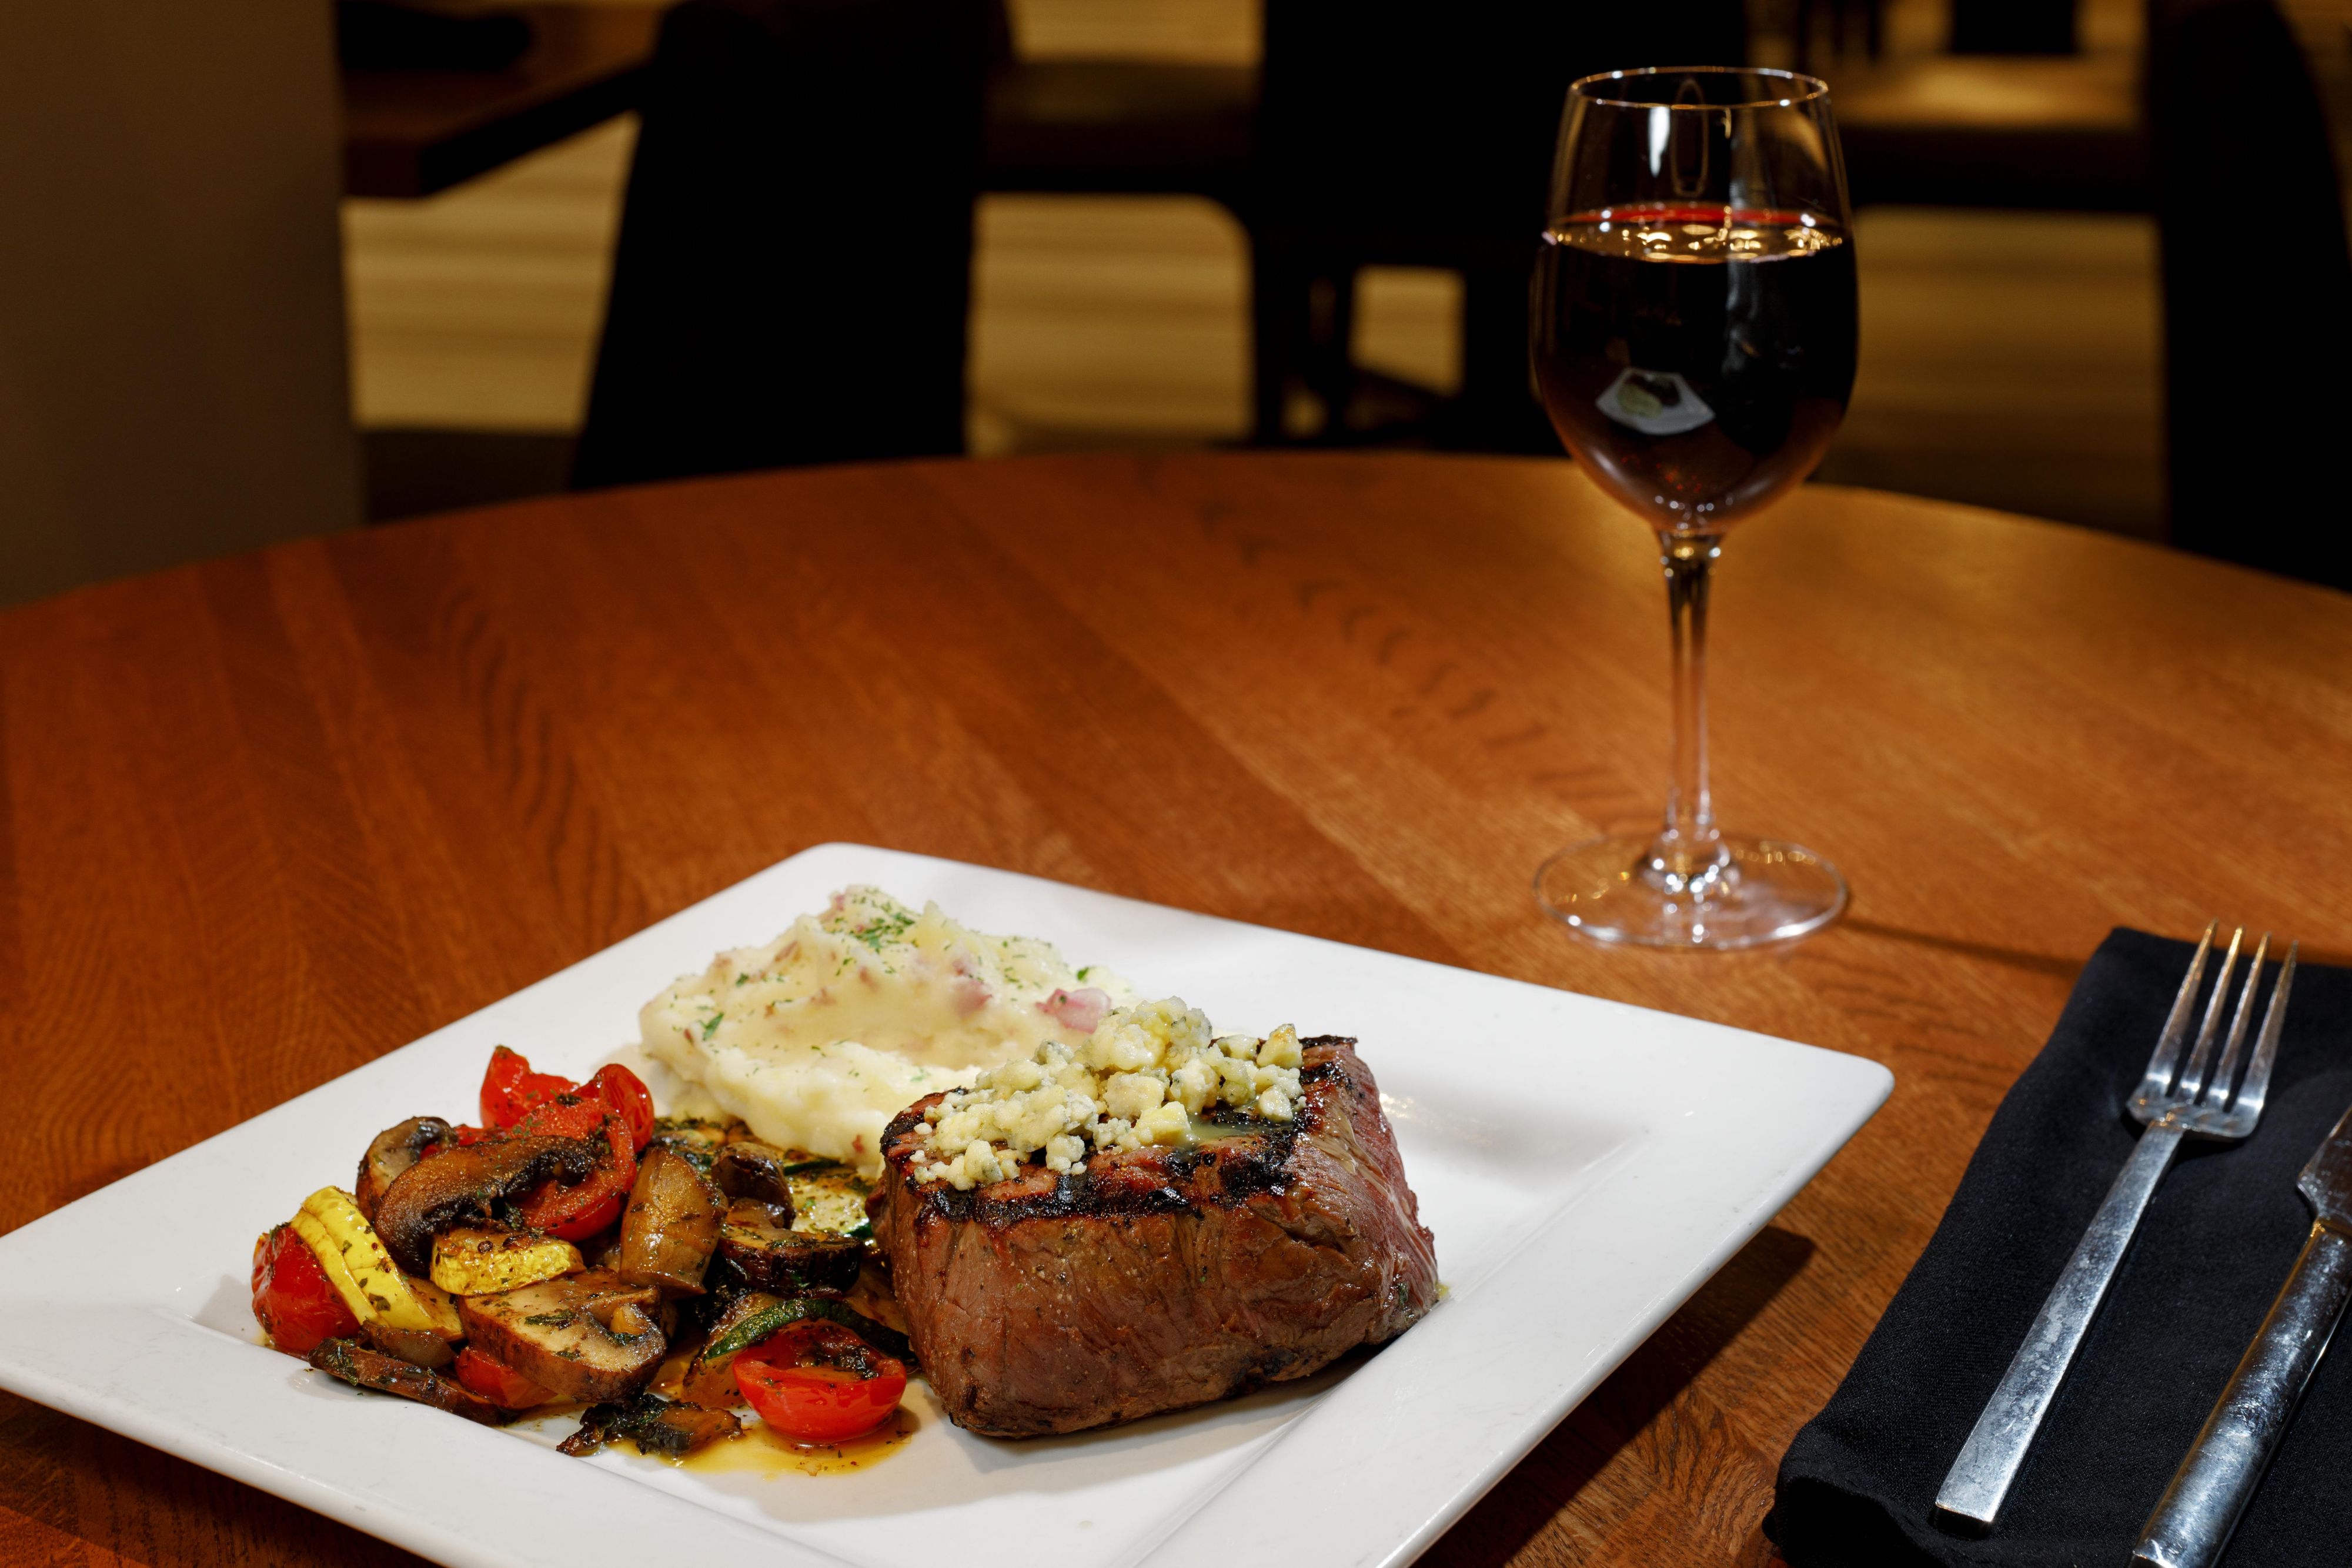 Relax with dinner and a glass of wine after a day of travel